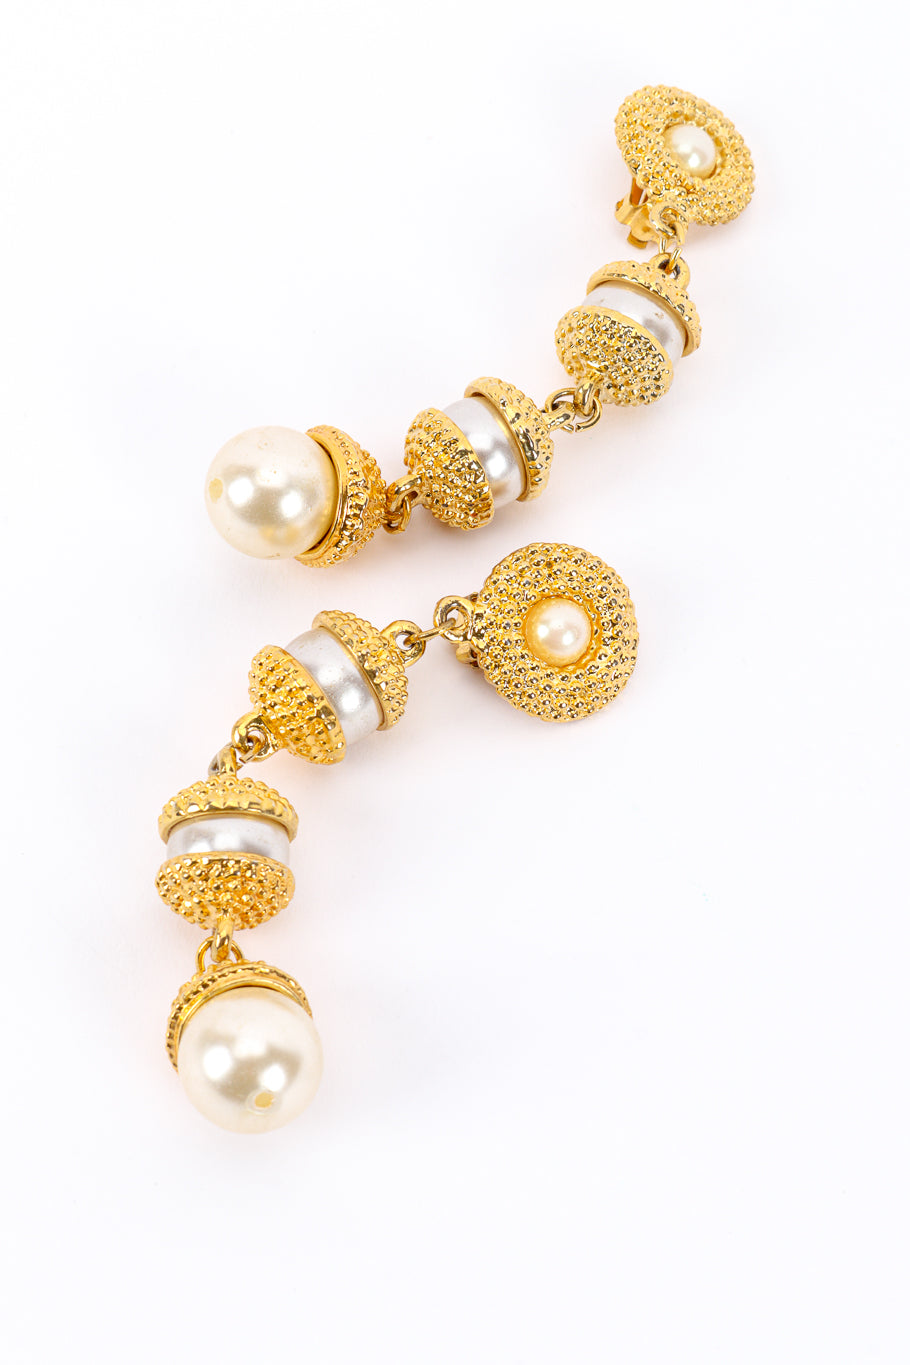 Vintage Pearl Barrel Drop Earrings curved away from each other @recessla